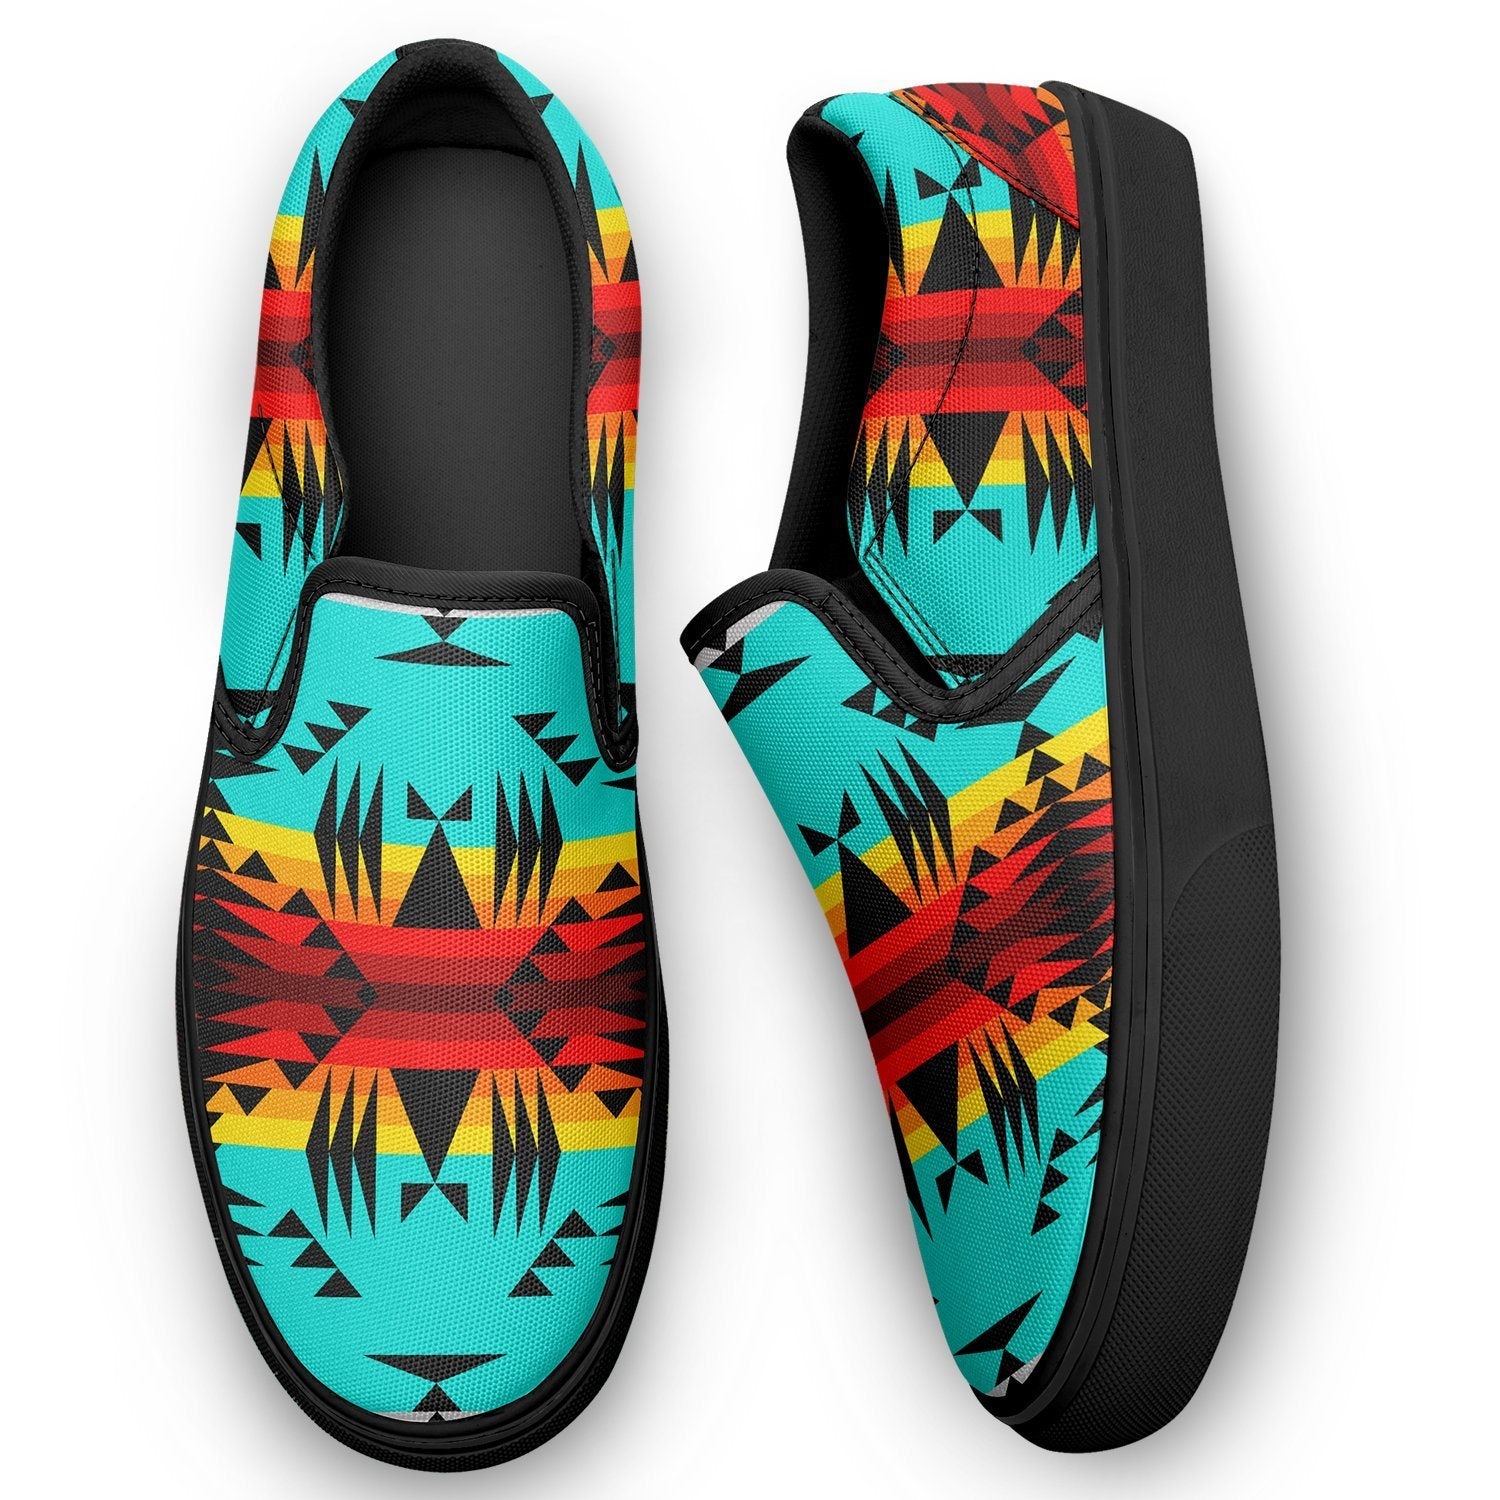 Between the Mountains Otoyimm Kid's Canvas Slip On Shoes 49 Dzine 